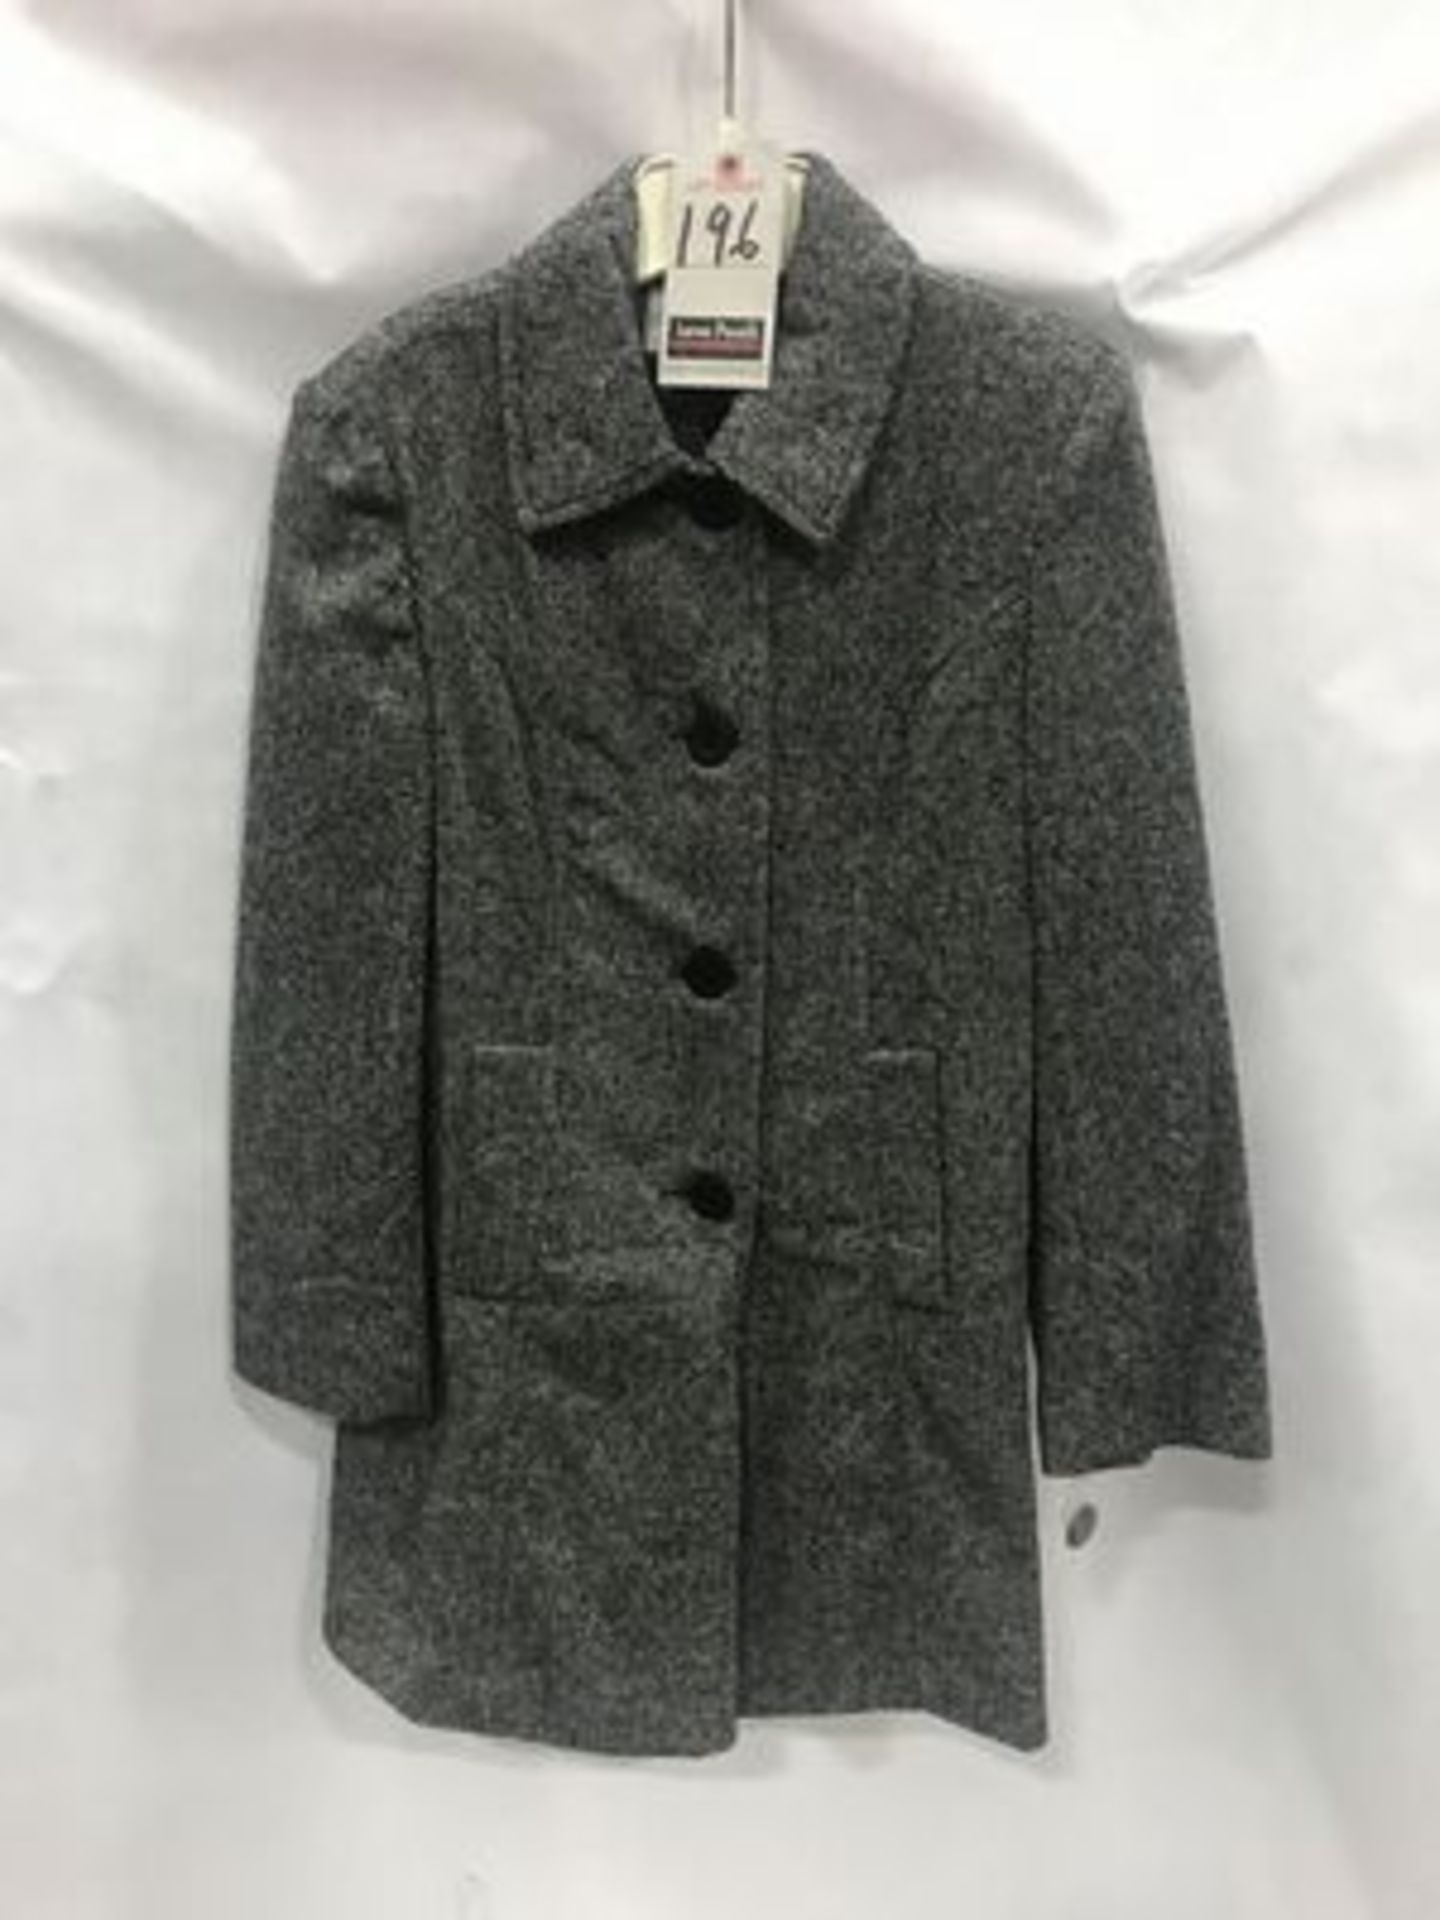 ASS'T WOMENS WOOL SINGLE BREASTED BLACK & WHITE JACKETS